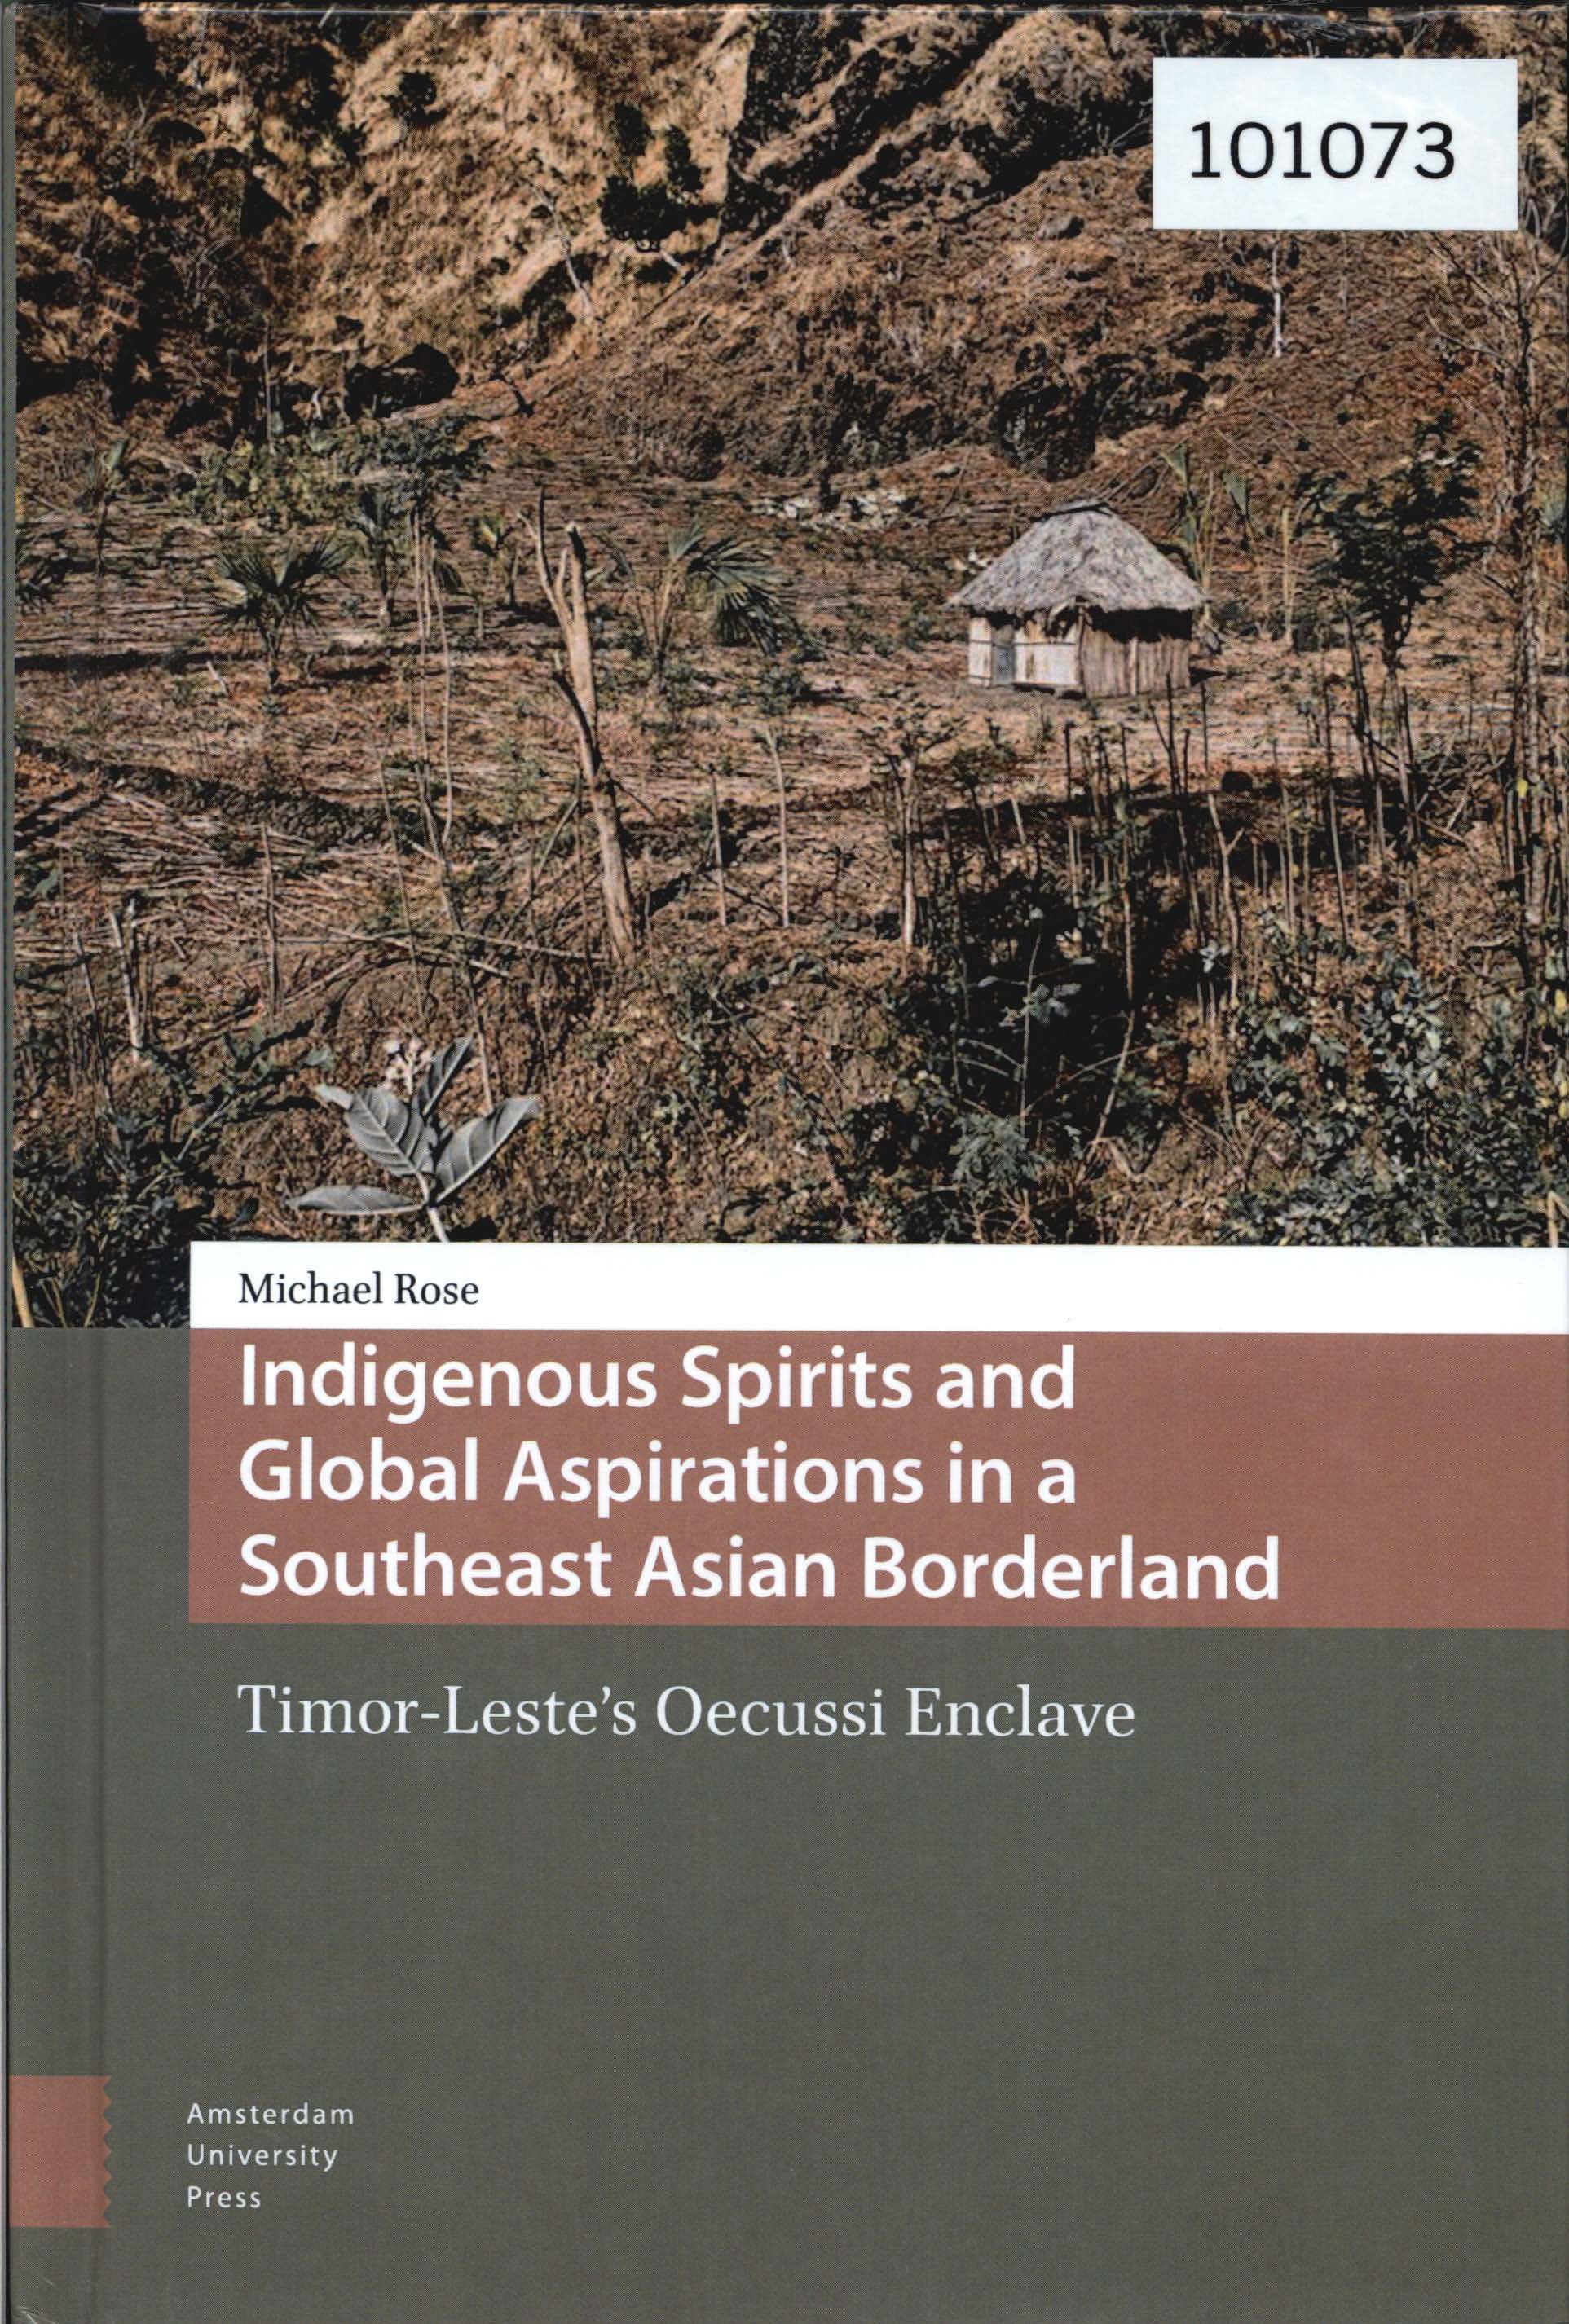 Indigenous Spirits and Global Aspirations in a Southeast Asian Borderland